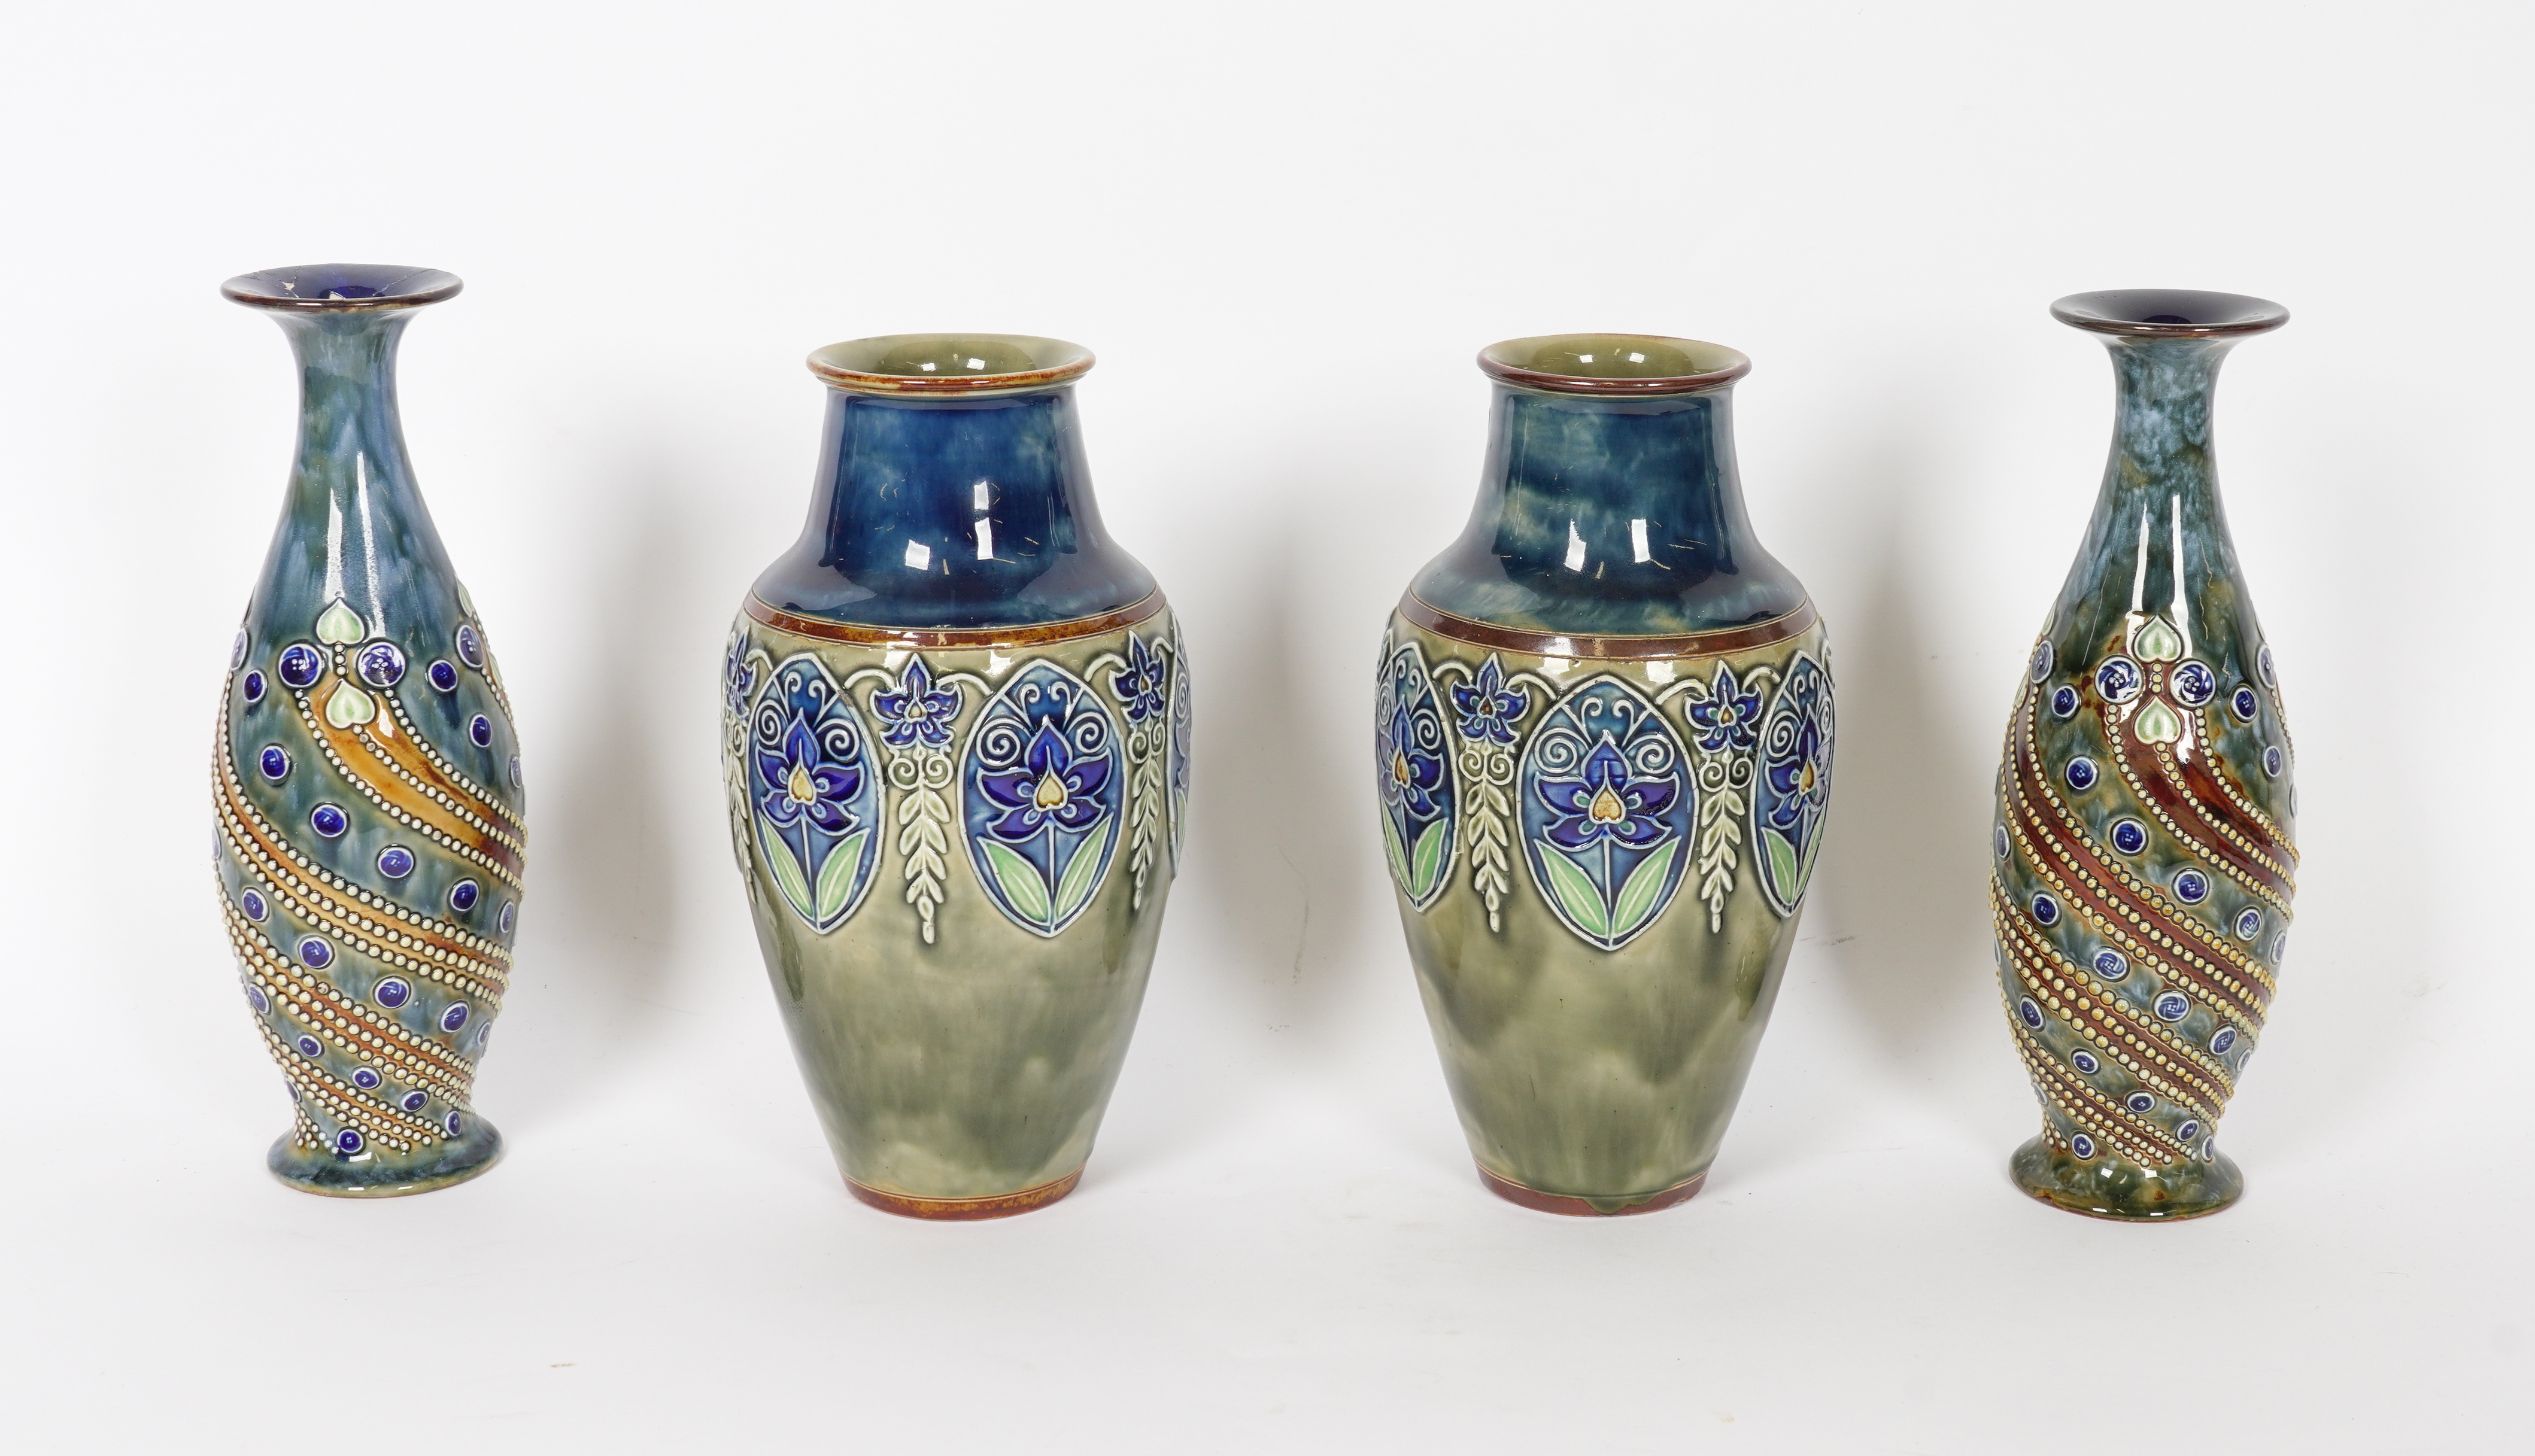 TWO PAIRS OF ROYAL DOULTON STONEWARE VASES (4) - Image 3 of 5